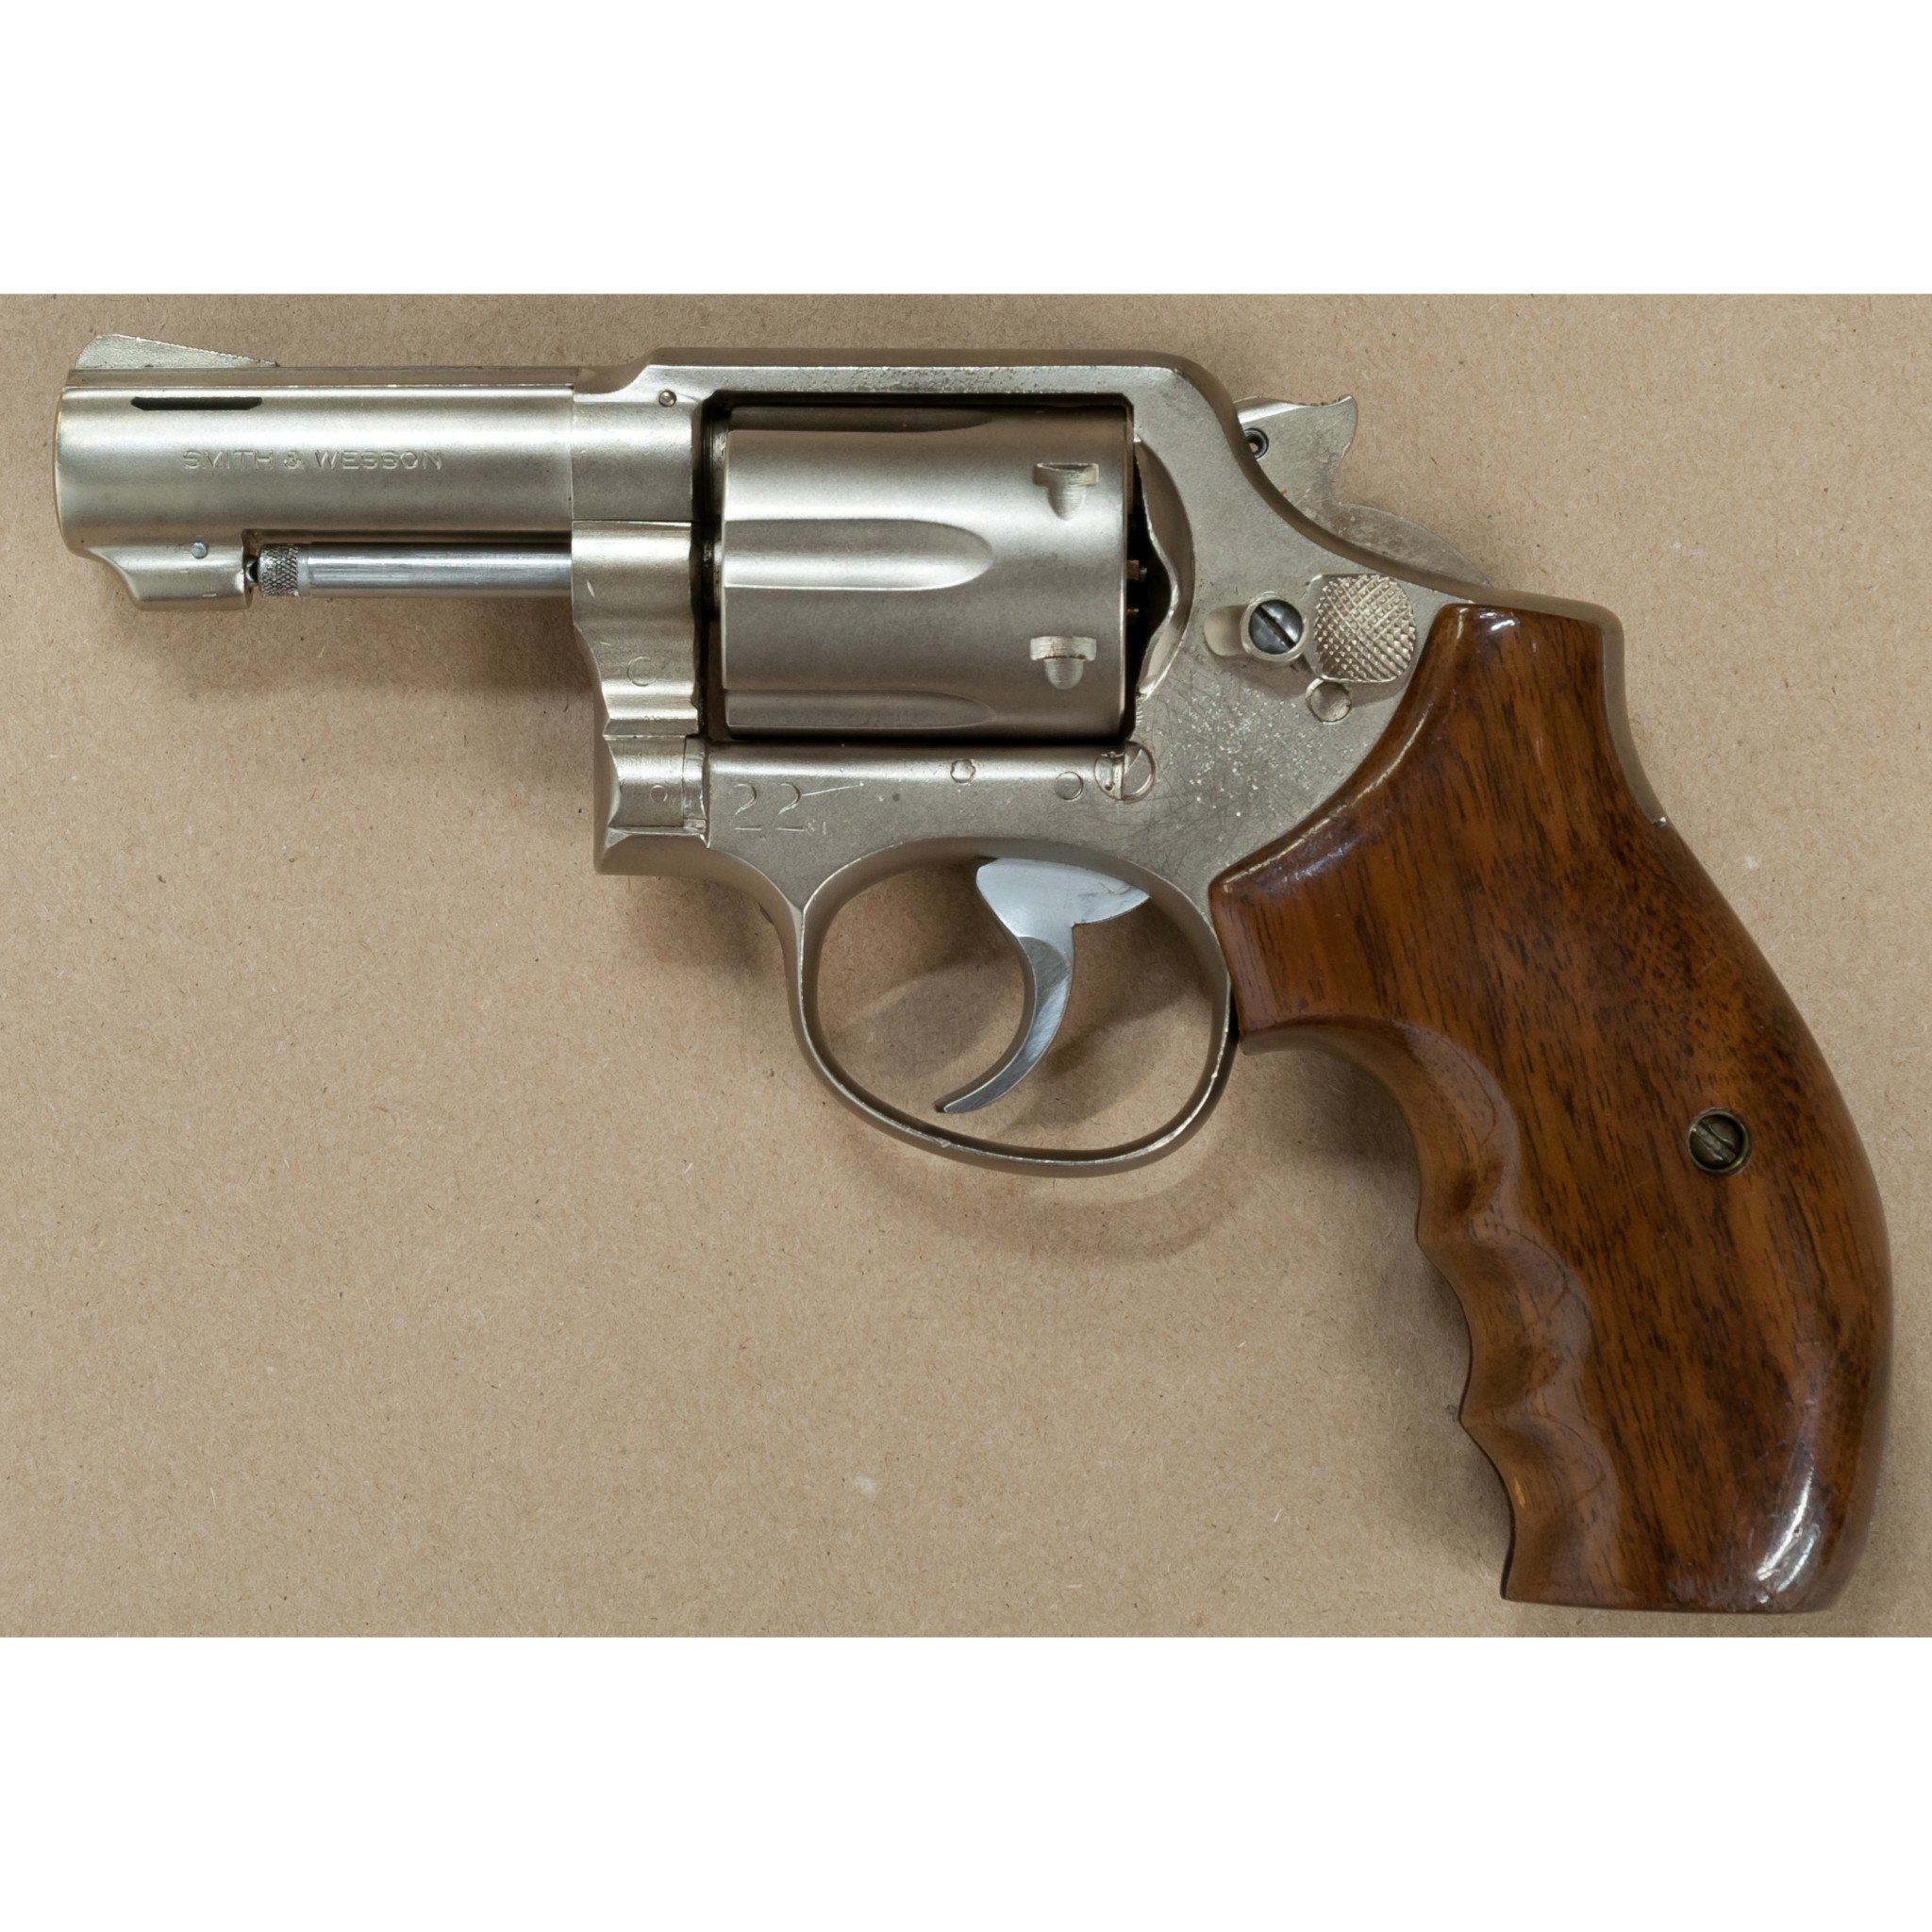 dating a smith and wesson revolver